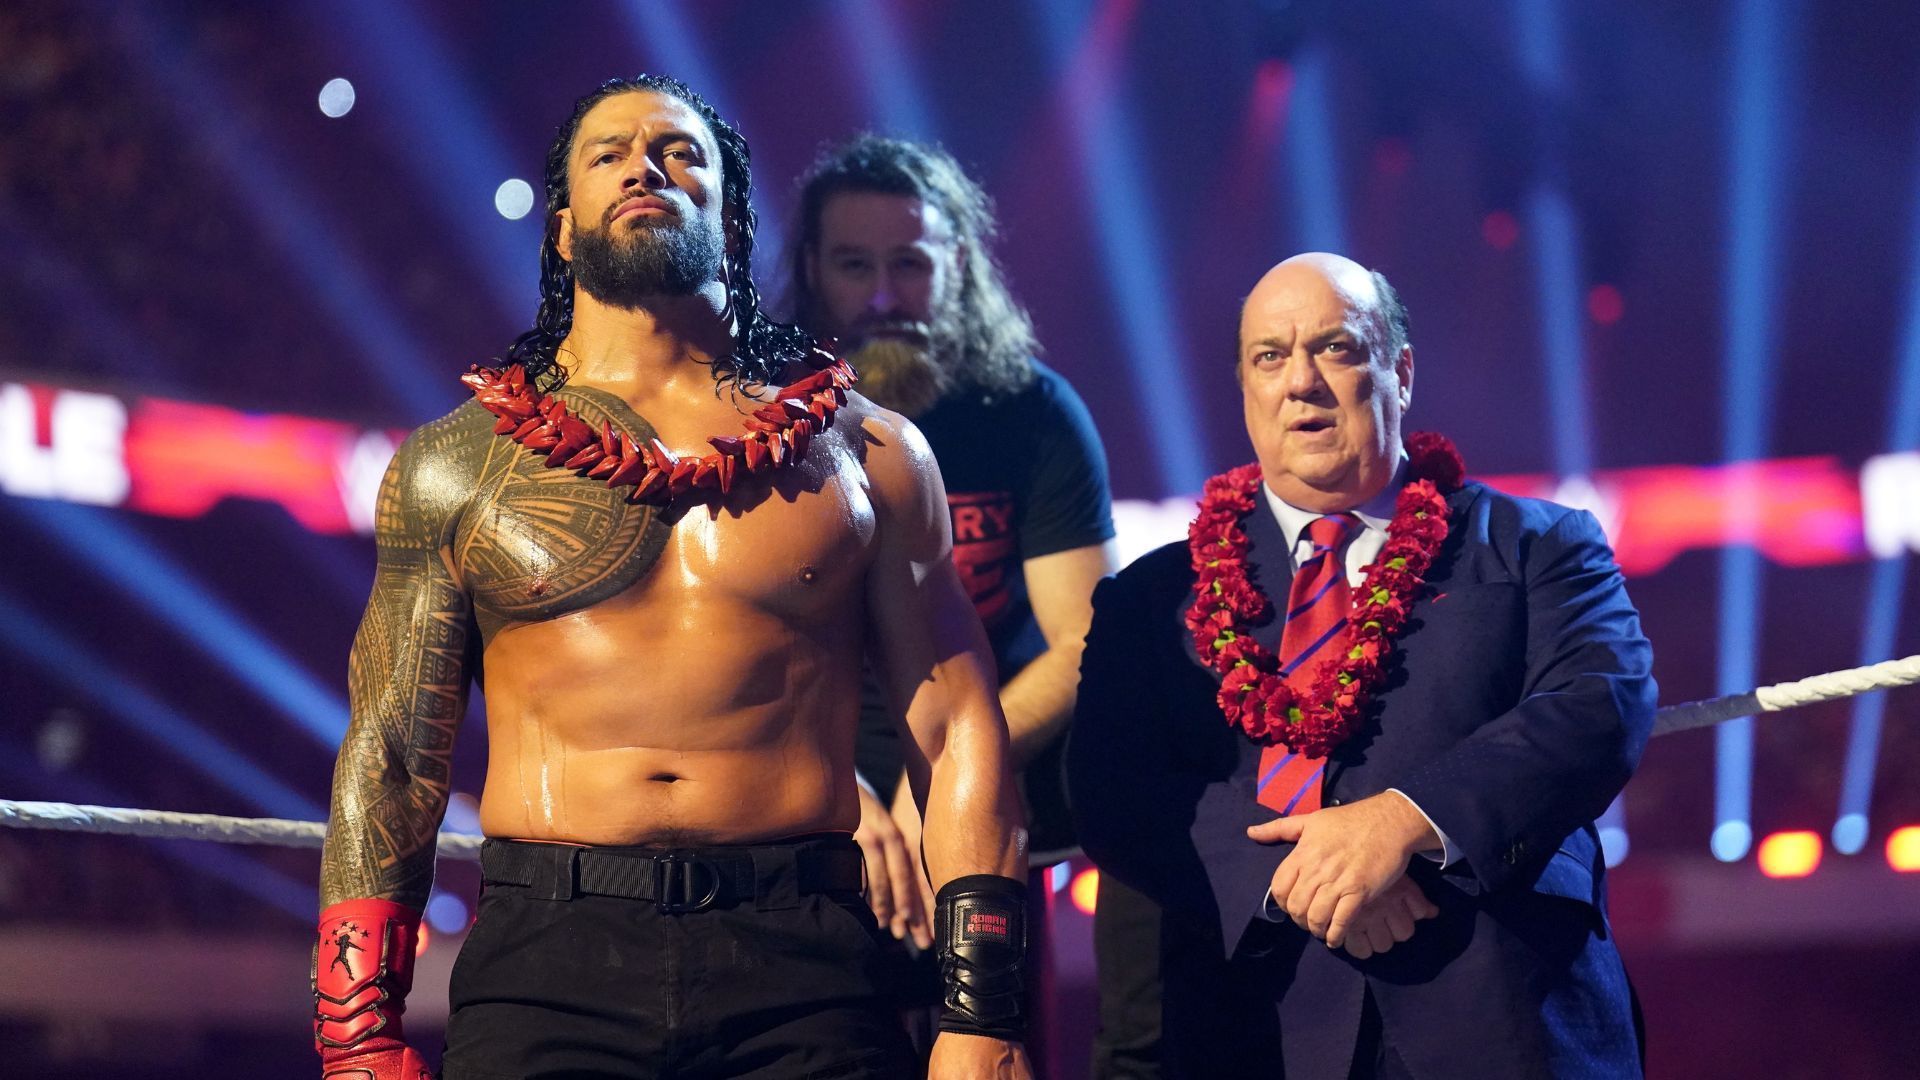 Roman Reigns and Paul Heyman have been together in The Bloodline since the first day 